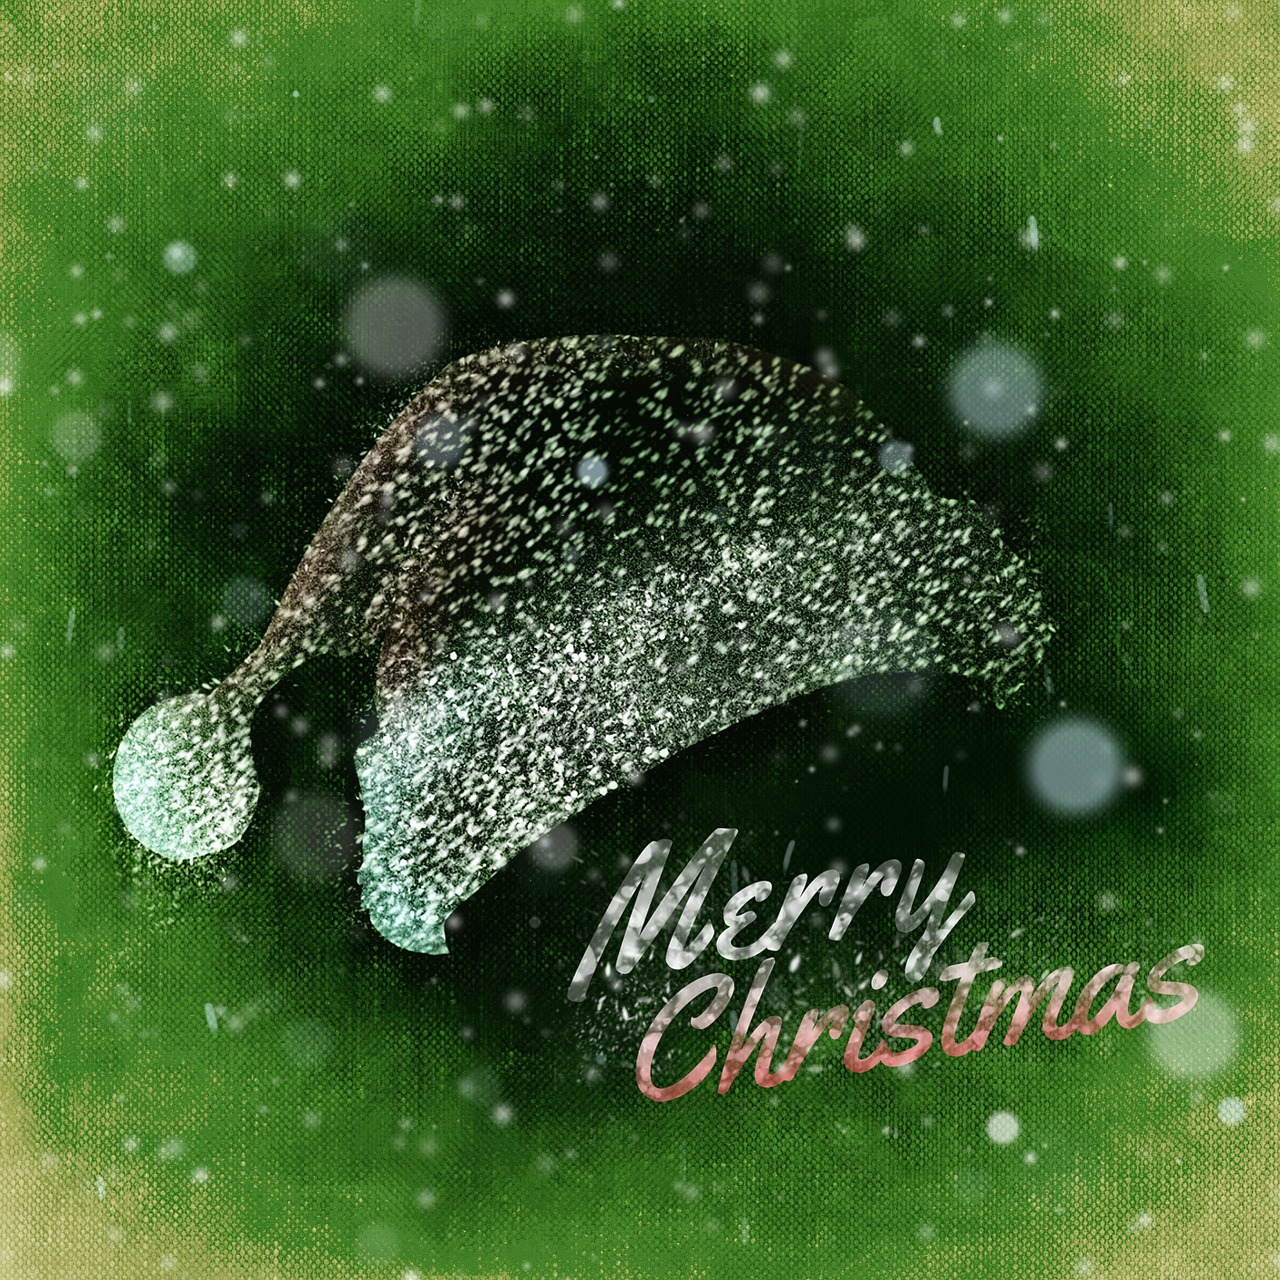 a green and white christmas card with a santa hat, shutterstock, digital art, texturized, sparkly, high quality product image”